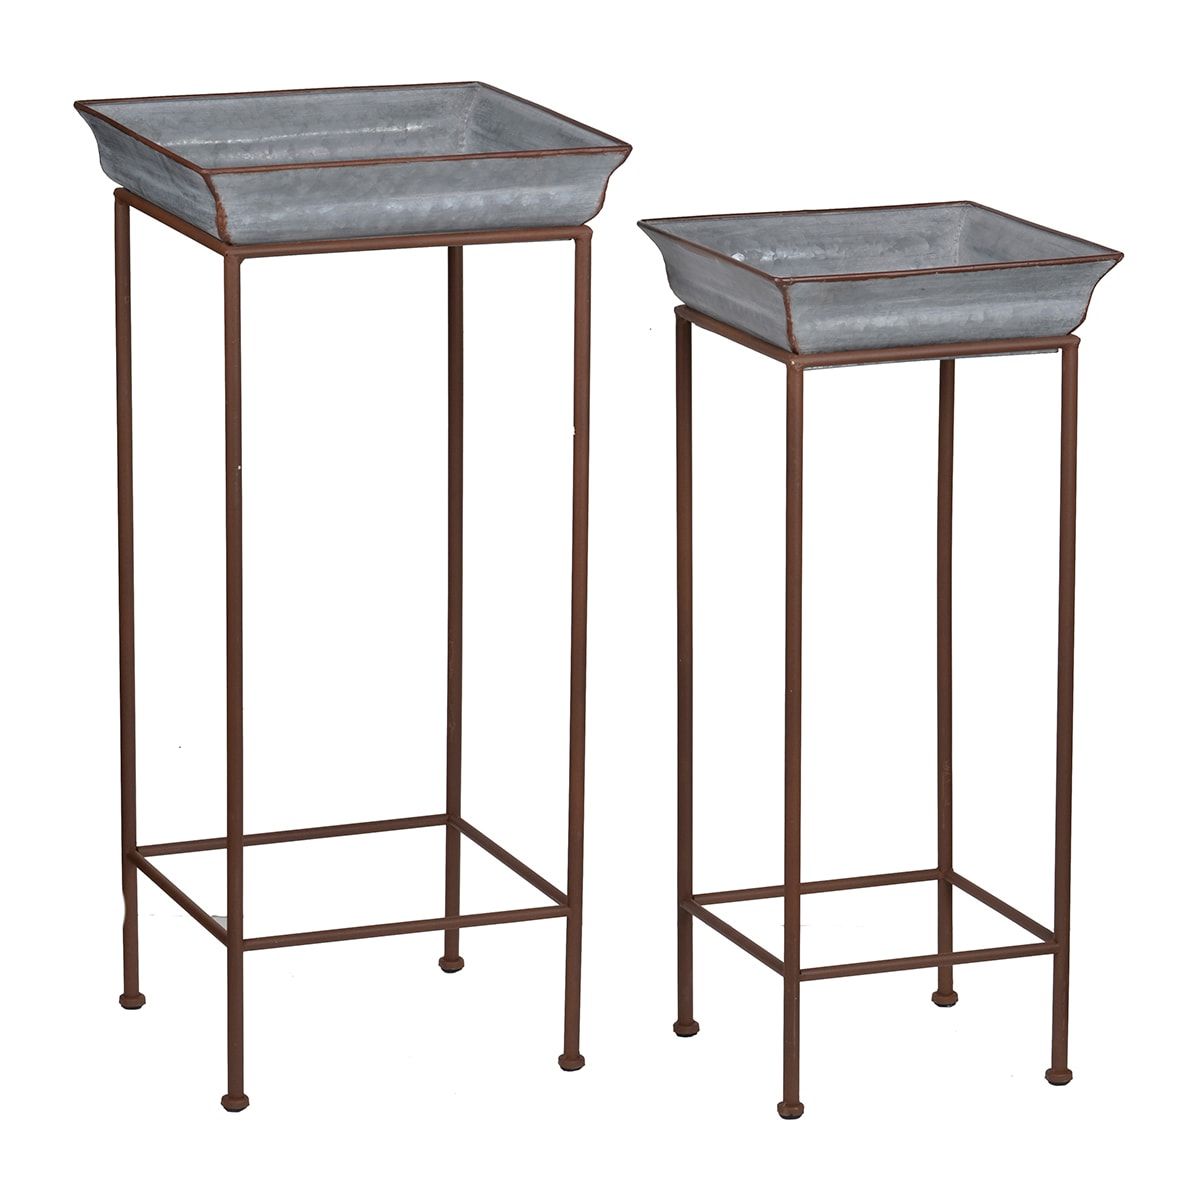 Iron Square Plant Stands With Fashionable A&b Home Shelburne Plant Stands 30.7 In H X  (View 4 of 15)